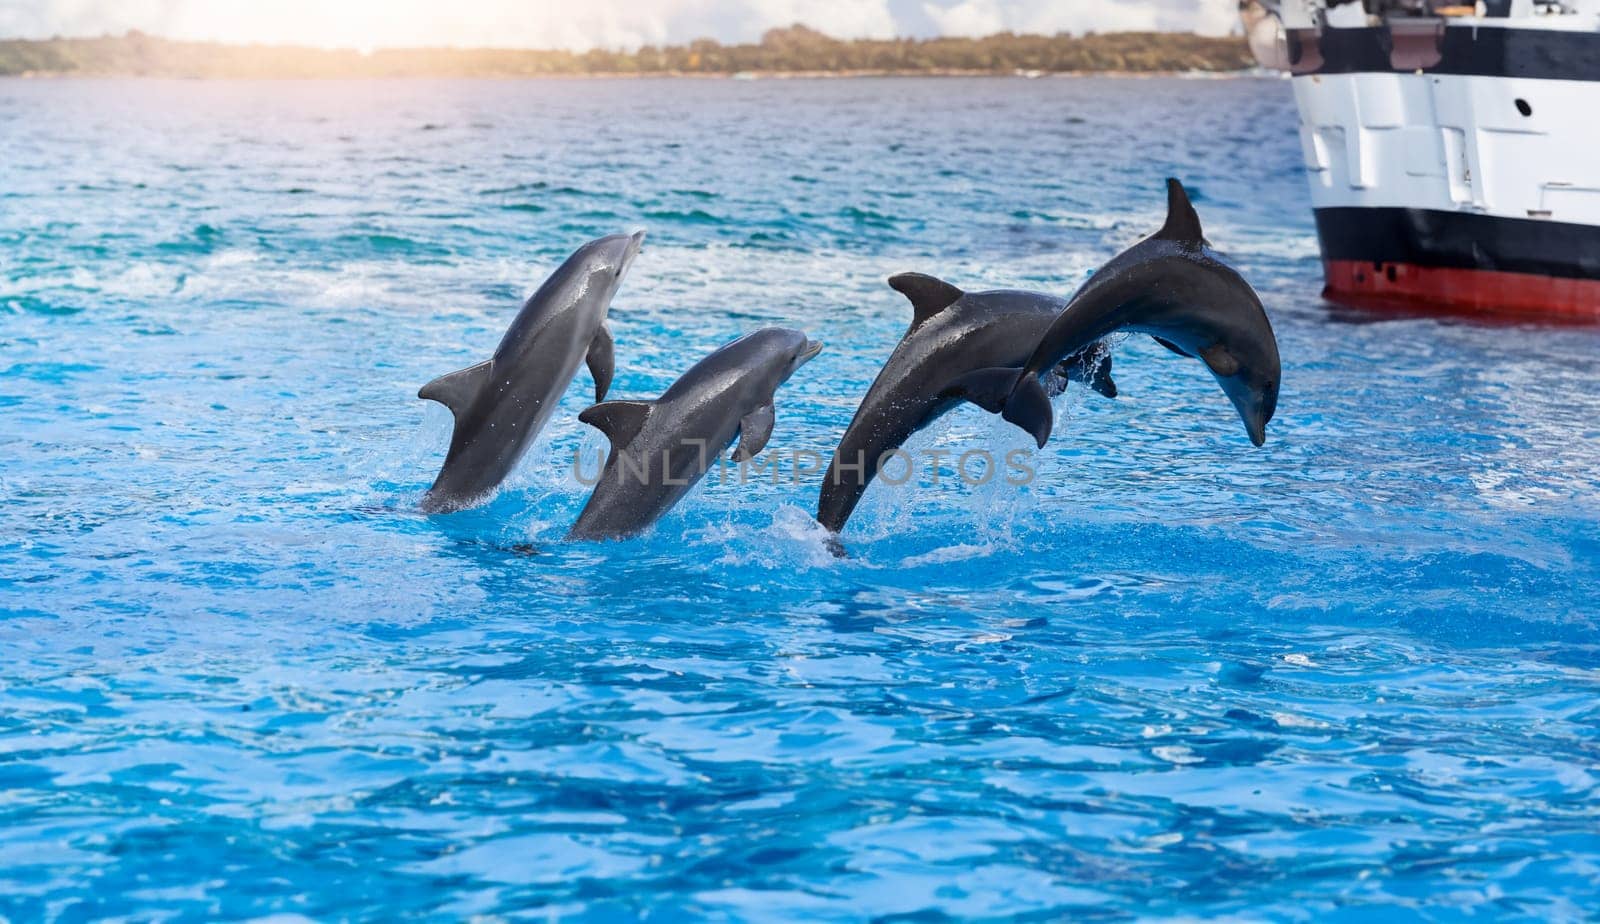 Three Playful Dolphins Leaping in Front of a Boat by Studia72